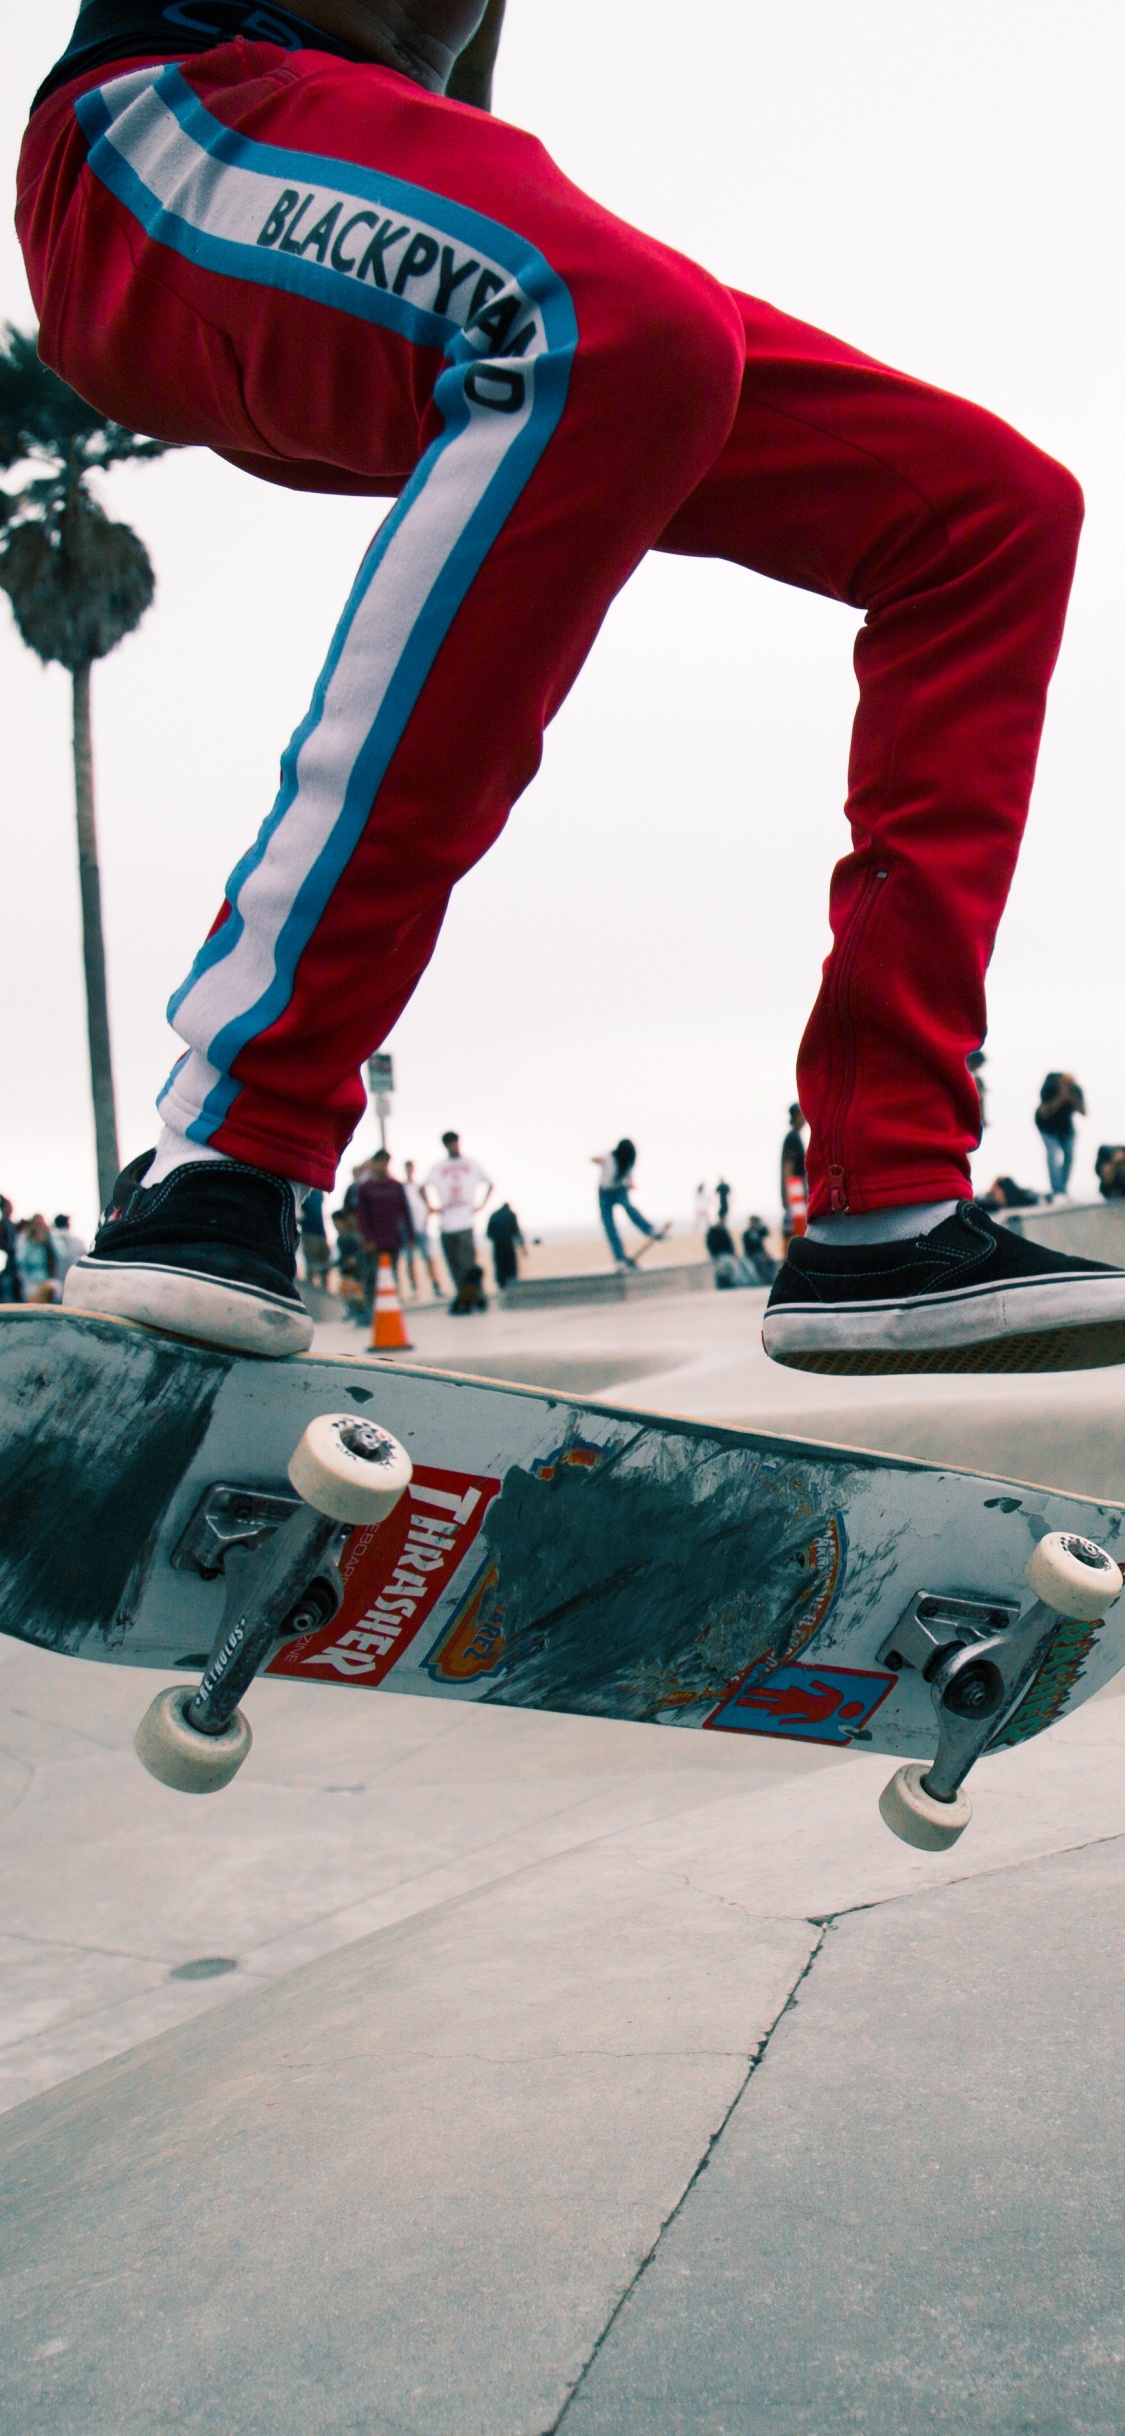 Man in Red Pants and Black and White Sneakers Riding Skateboard. Wallpaper in 1125x2436 Resolution